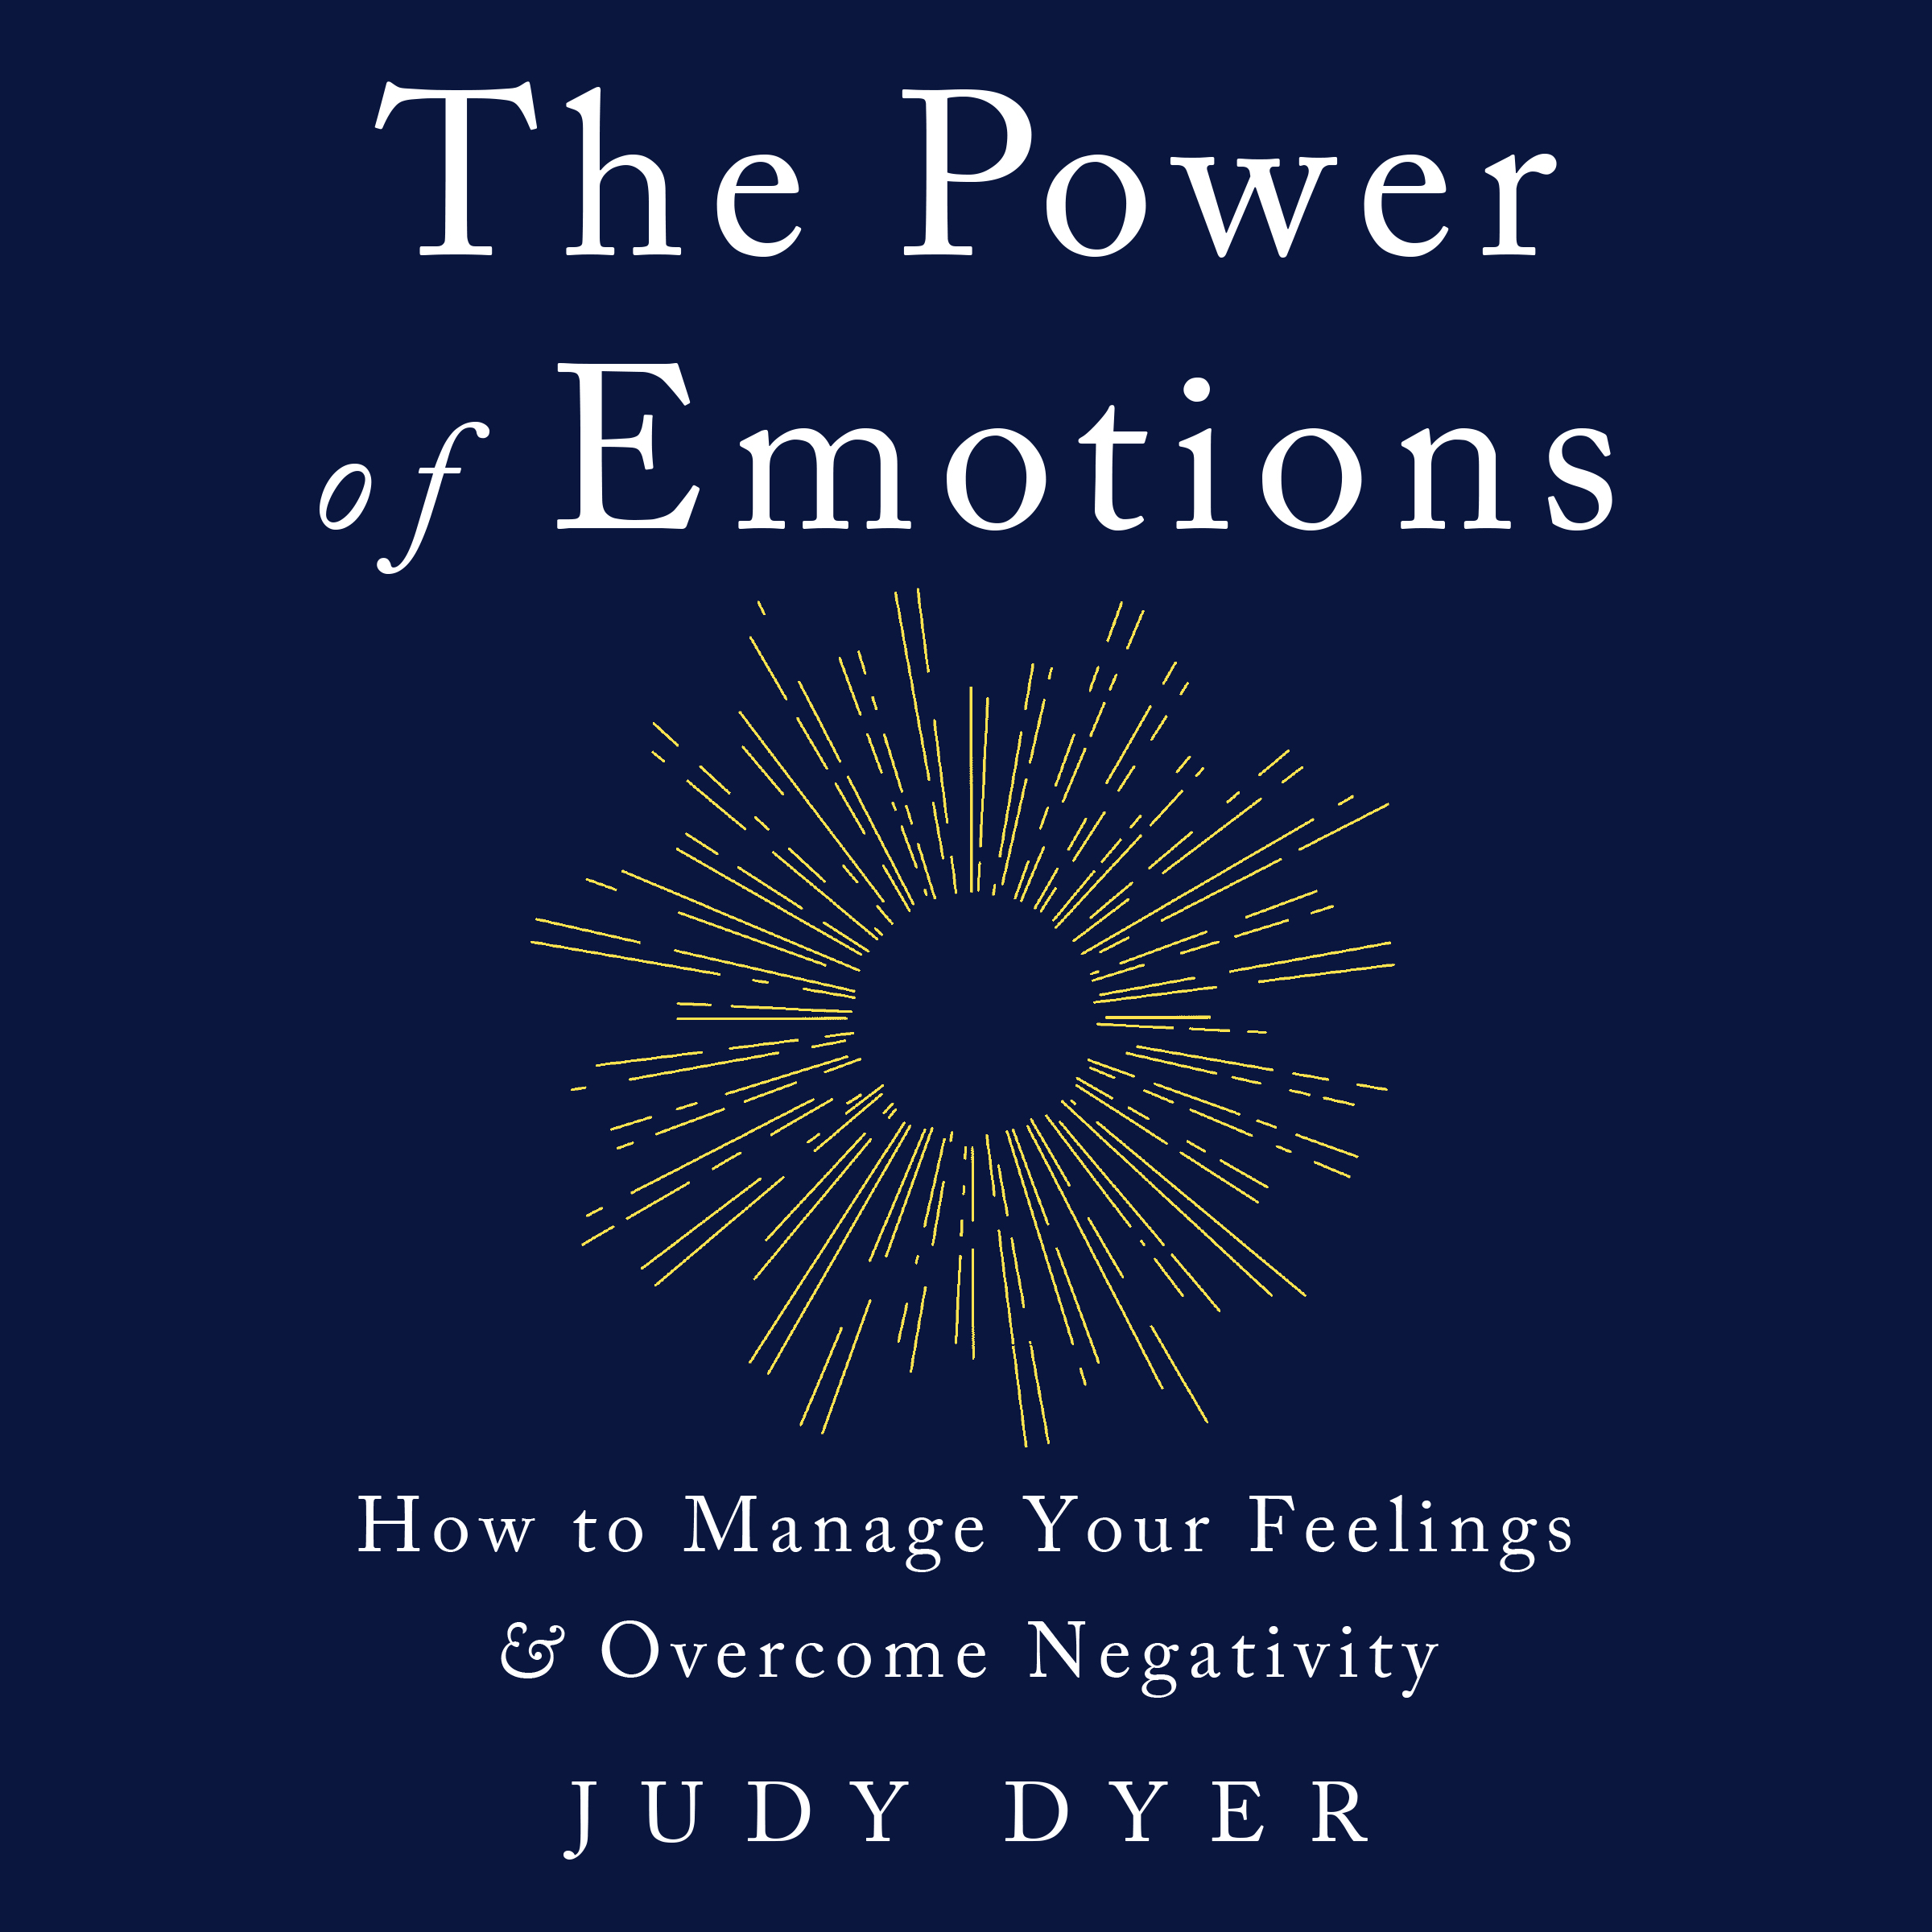 The Power of Emotions by Judy Dyer